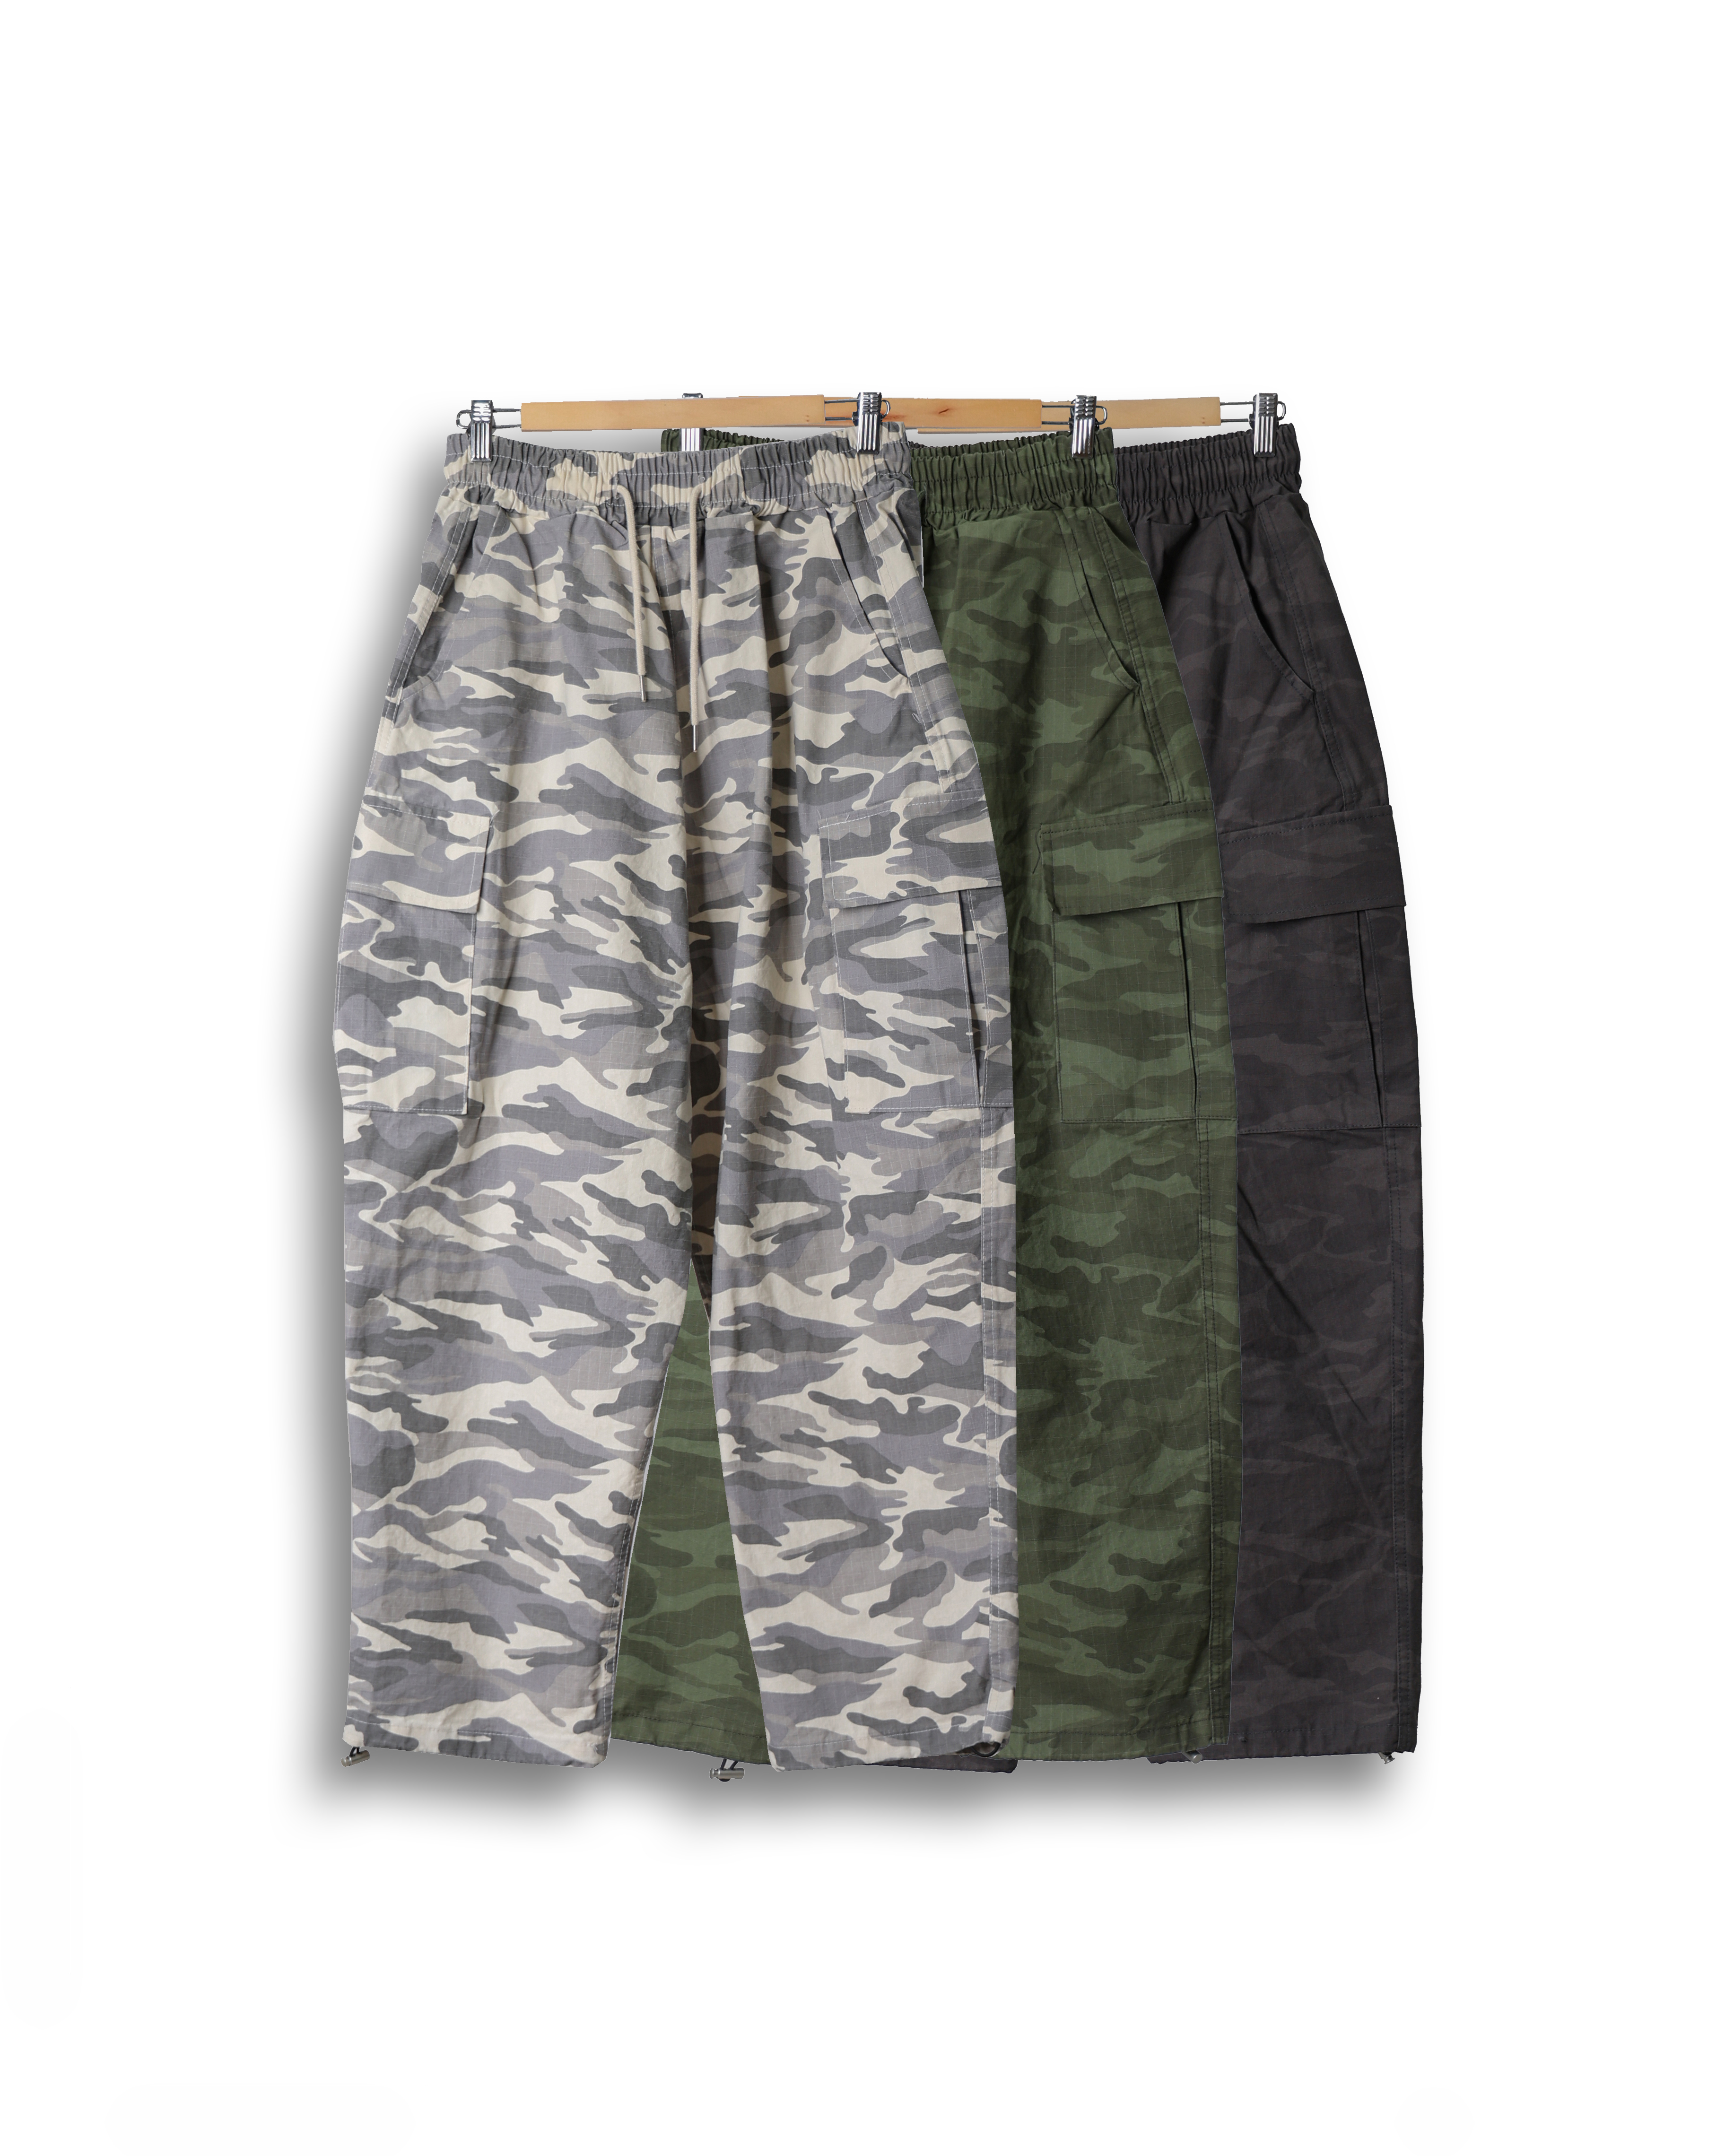 PERSNT Mil Camo Pattern Balloon Pants (Black/Olive/Beige)